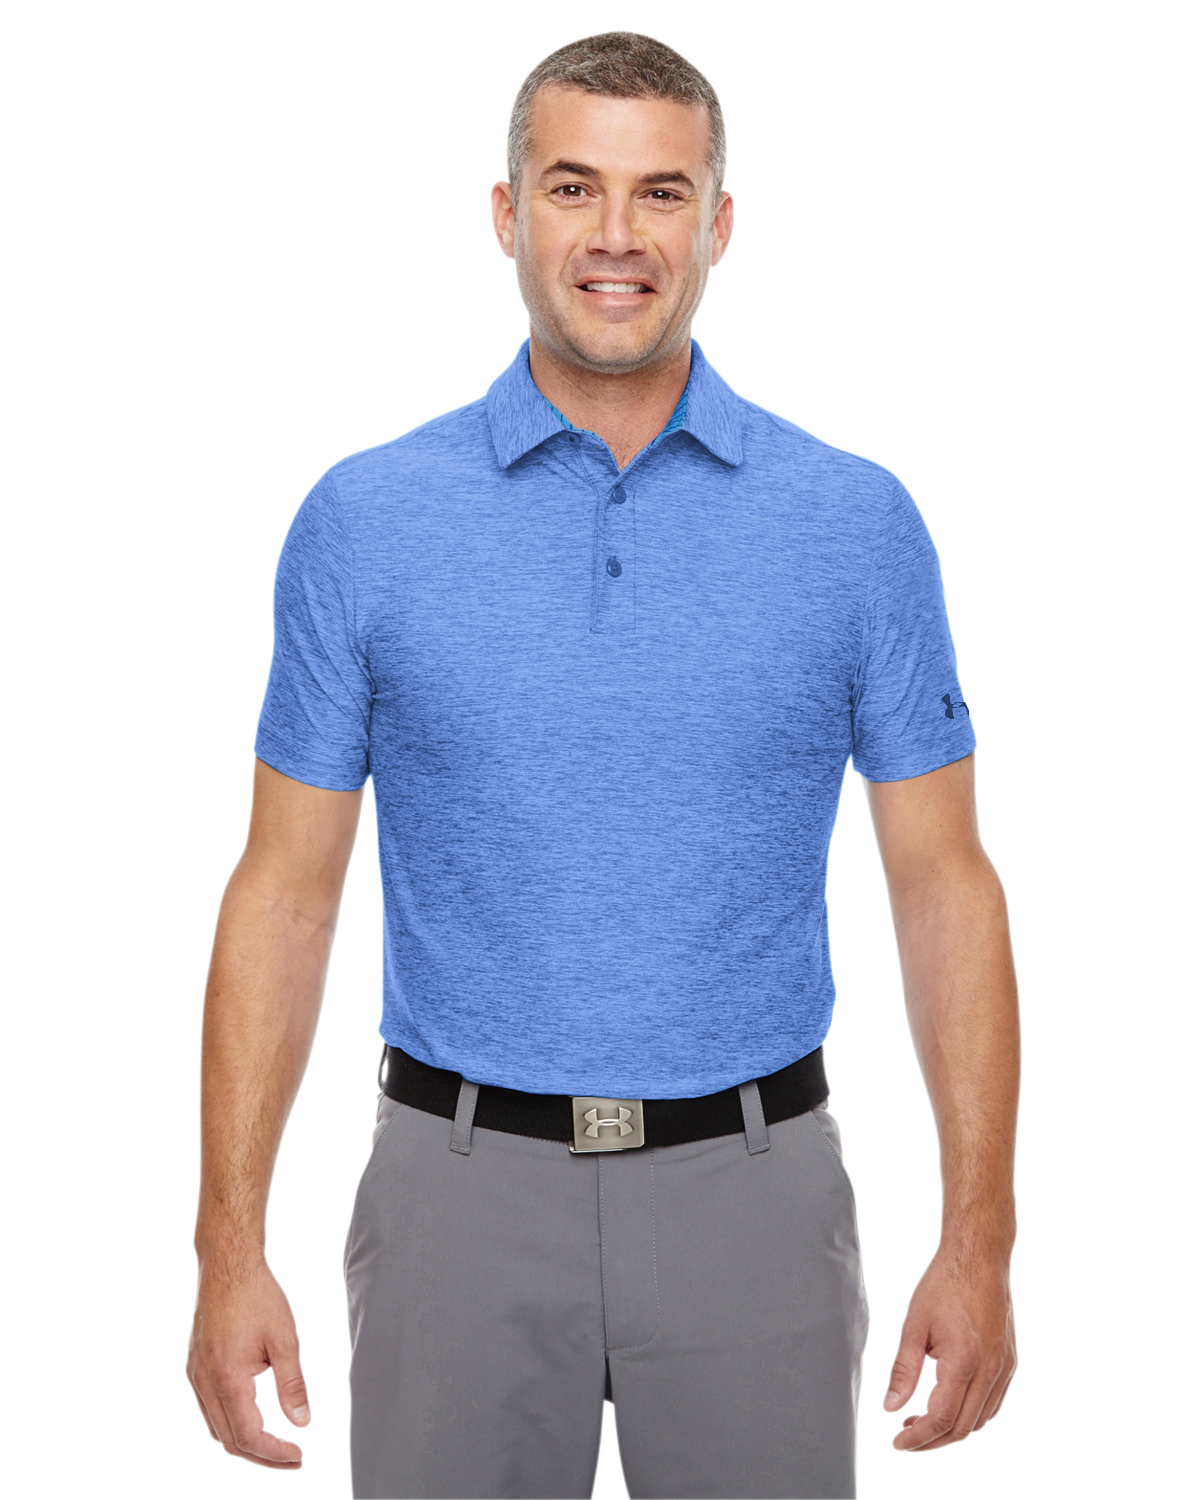 Under Armour 1283705 - Men's Playoff Polo